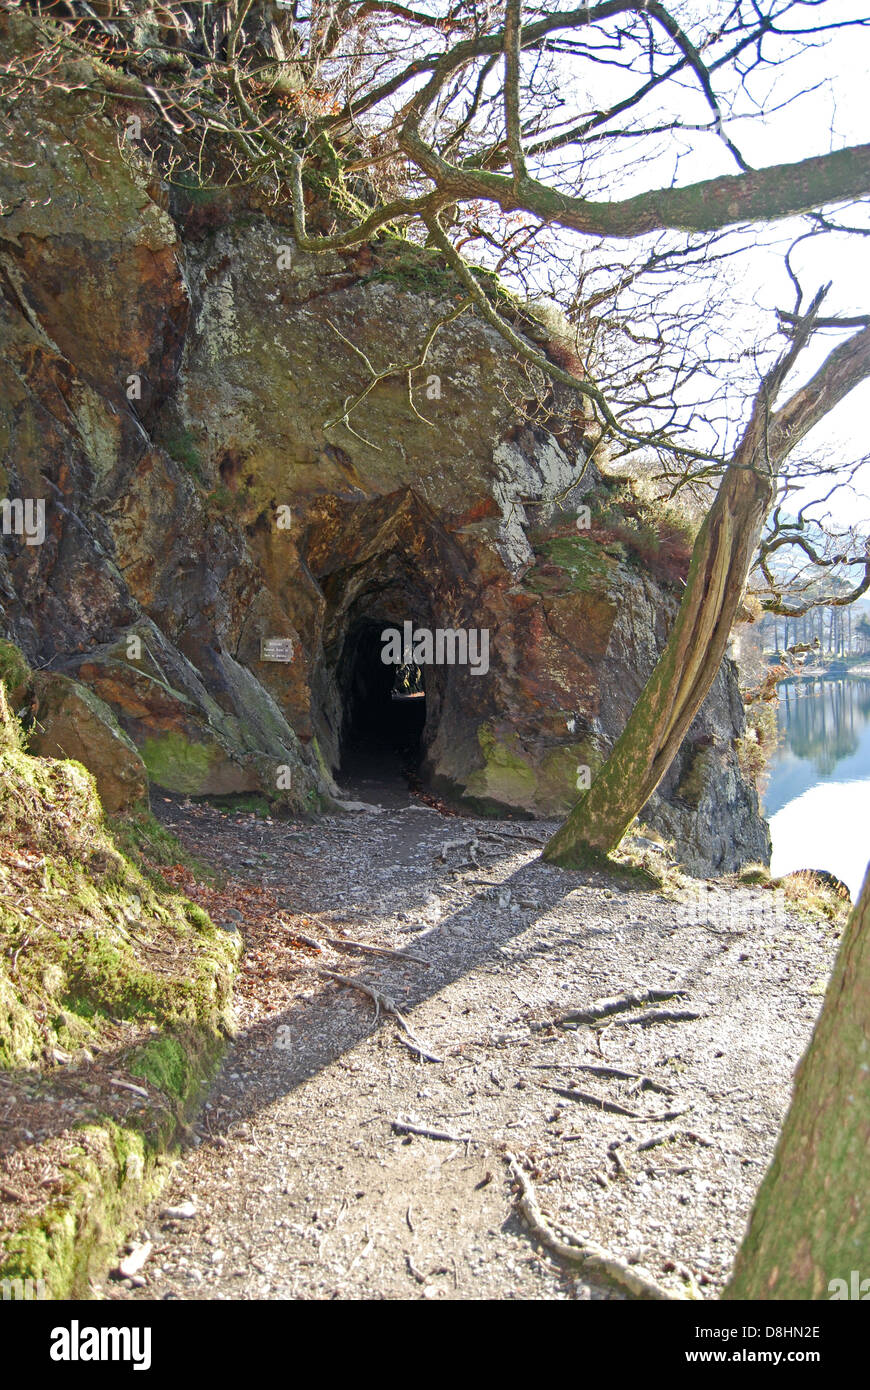 Lakeside path goes through a tunnel, Buttermere, The Lake District, Cumbria.  UK. Stock Photo